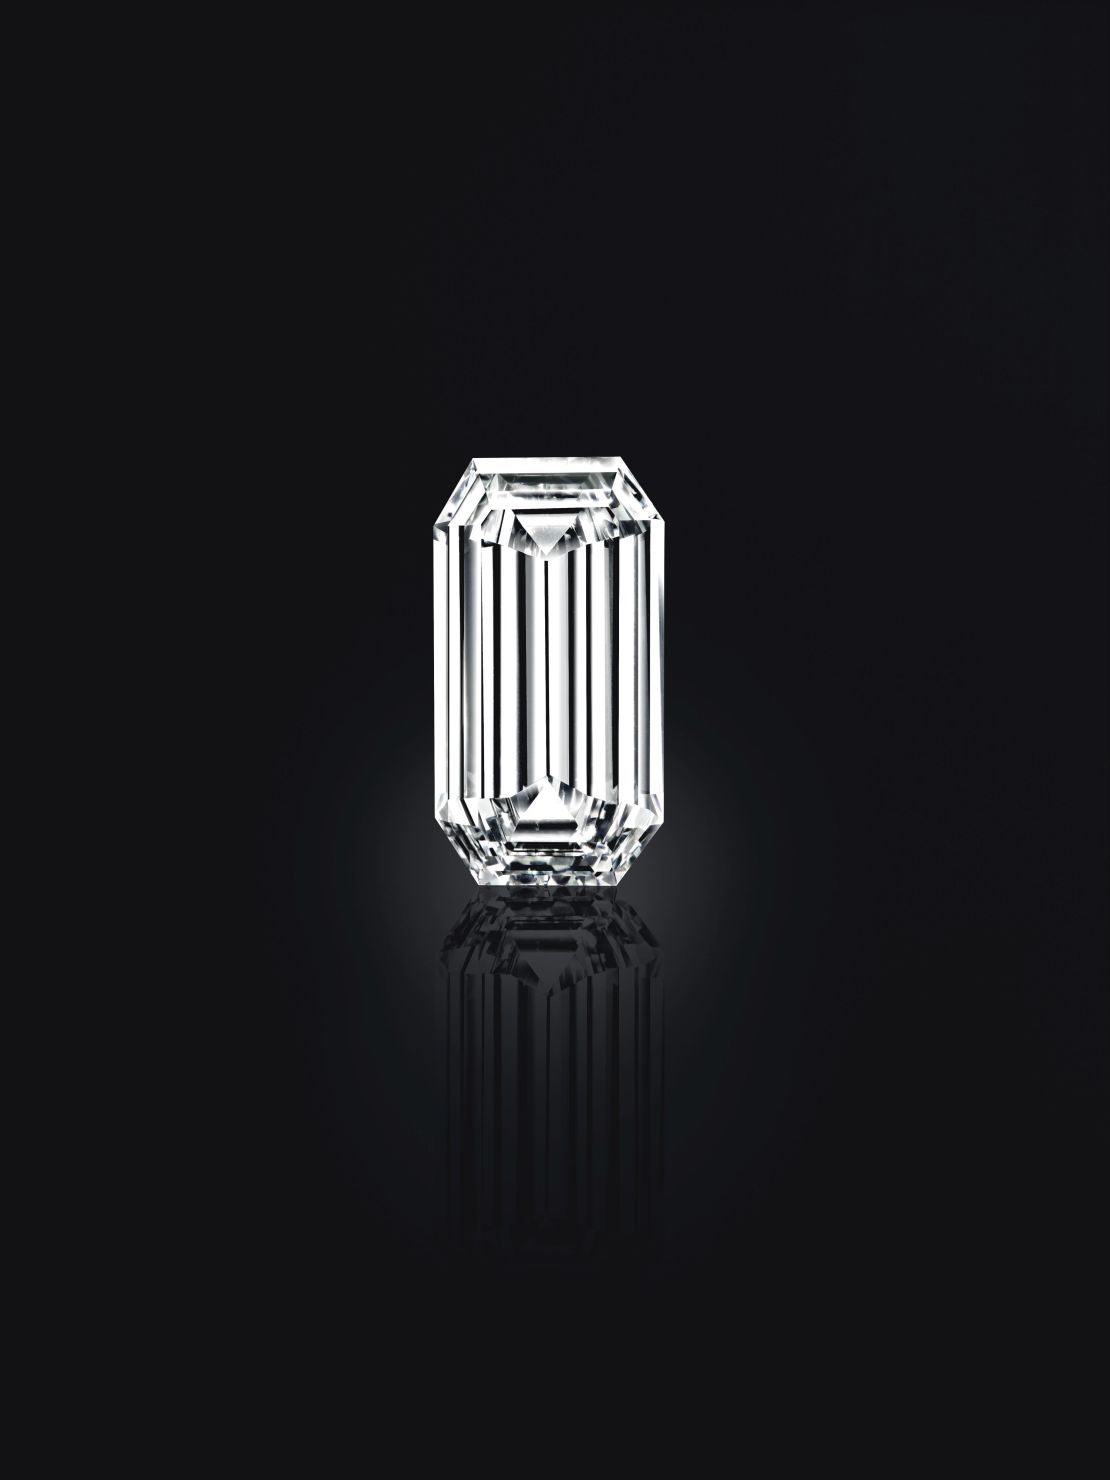 The Mirror of Paradise diamond ring measures 52.58 carats